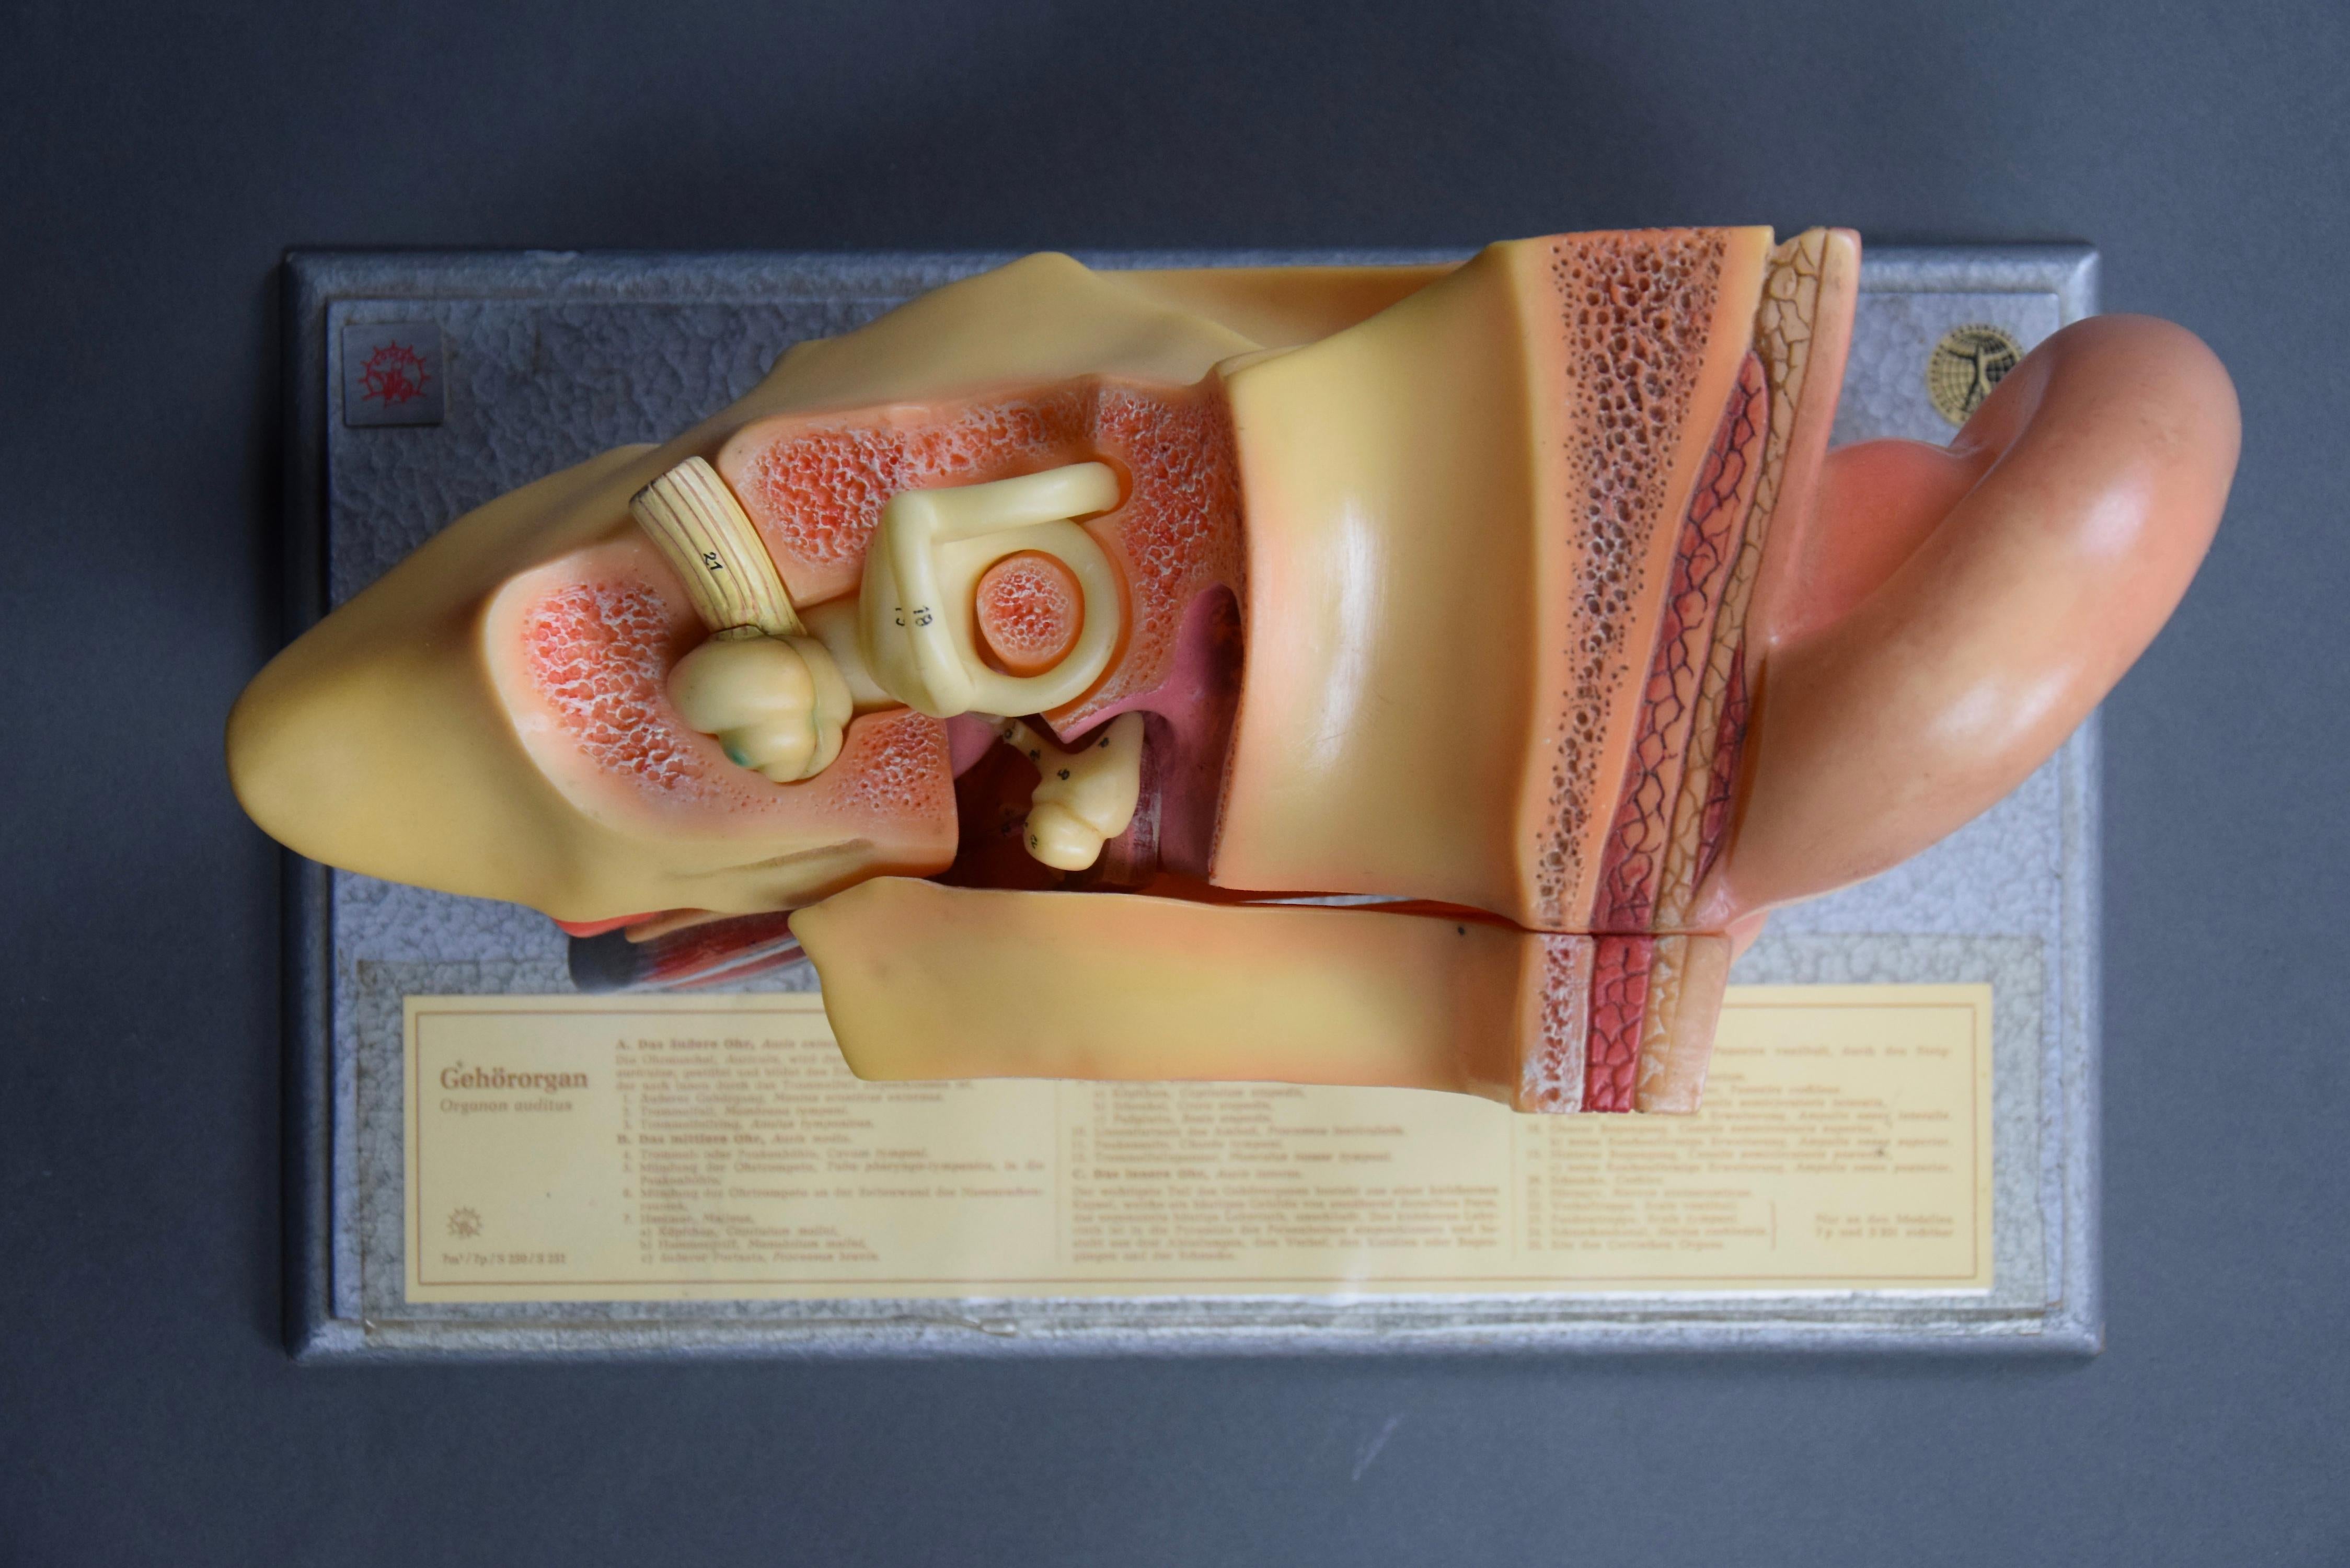 Introducing the midcentury Organon Auditus Anatomical Model by Somso, a true masterpiece in the world of anatomical models! This amazing model, made in former East Germany, features a removable earing organ that allows for detailed study of the